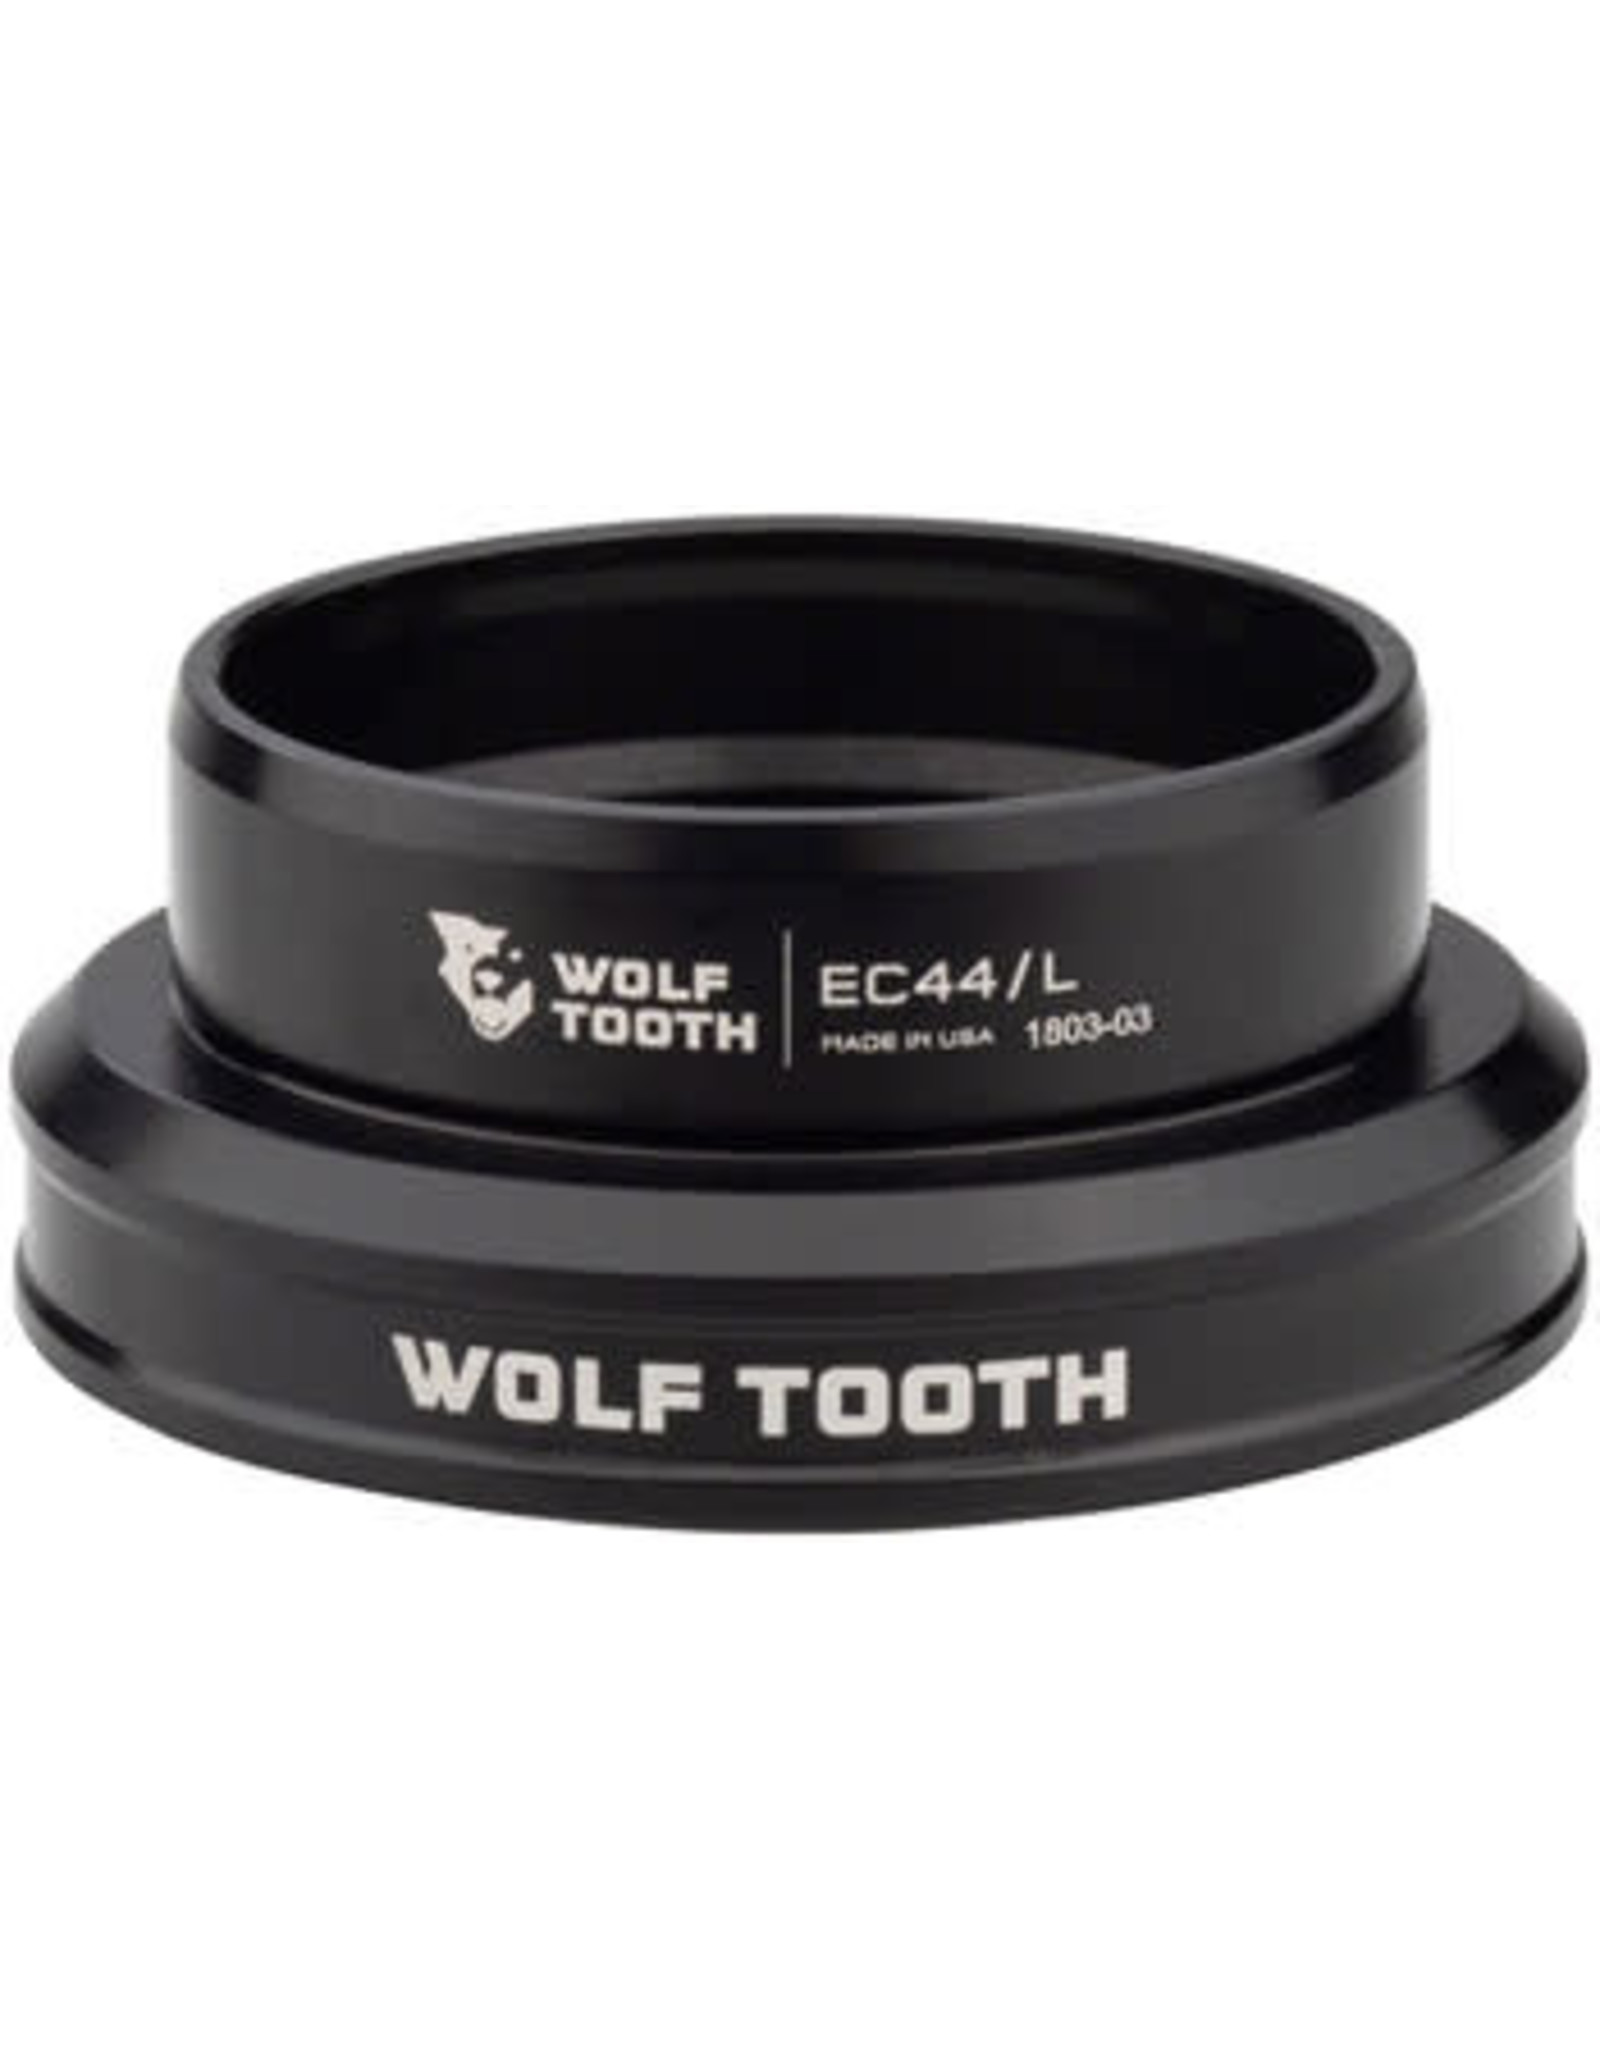 Wolf Tooth Components Wolf Tooth Performance Headset - EC44/40 Lower, Black